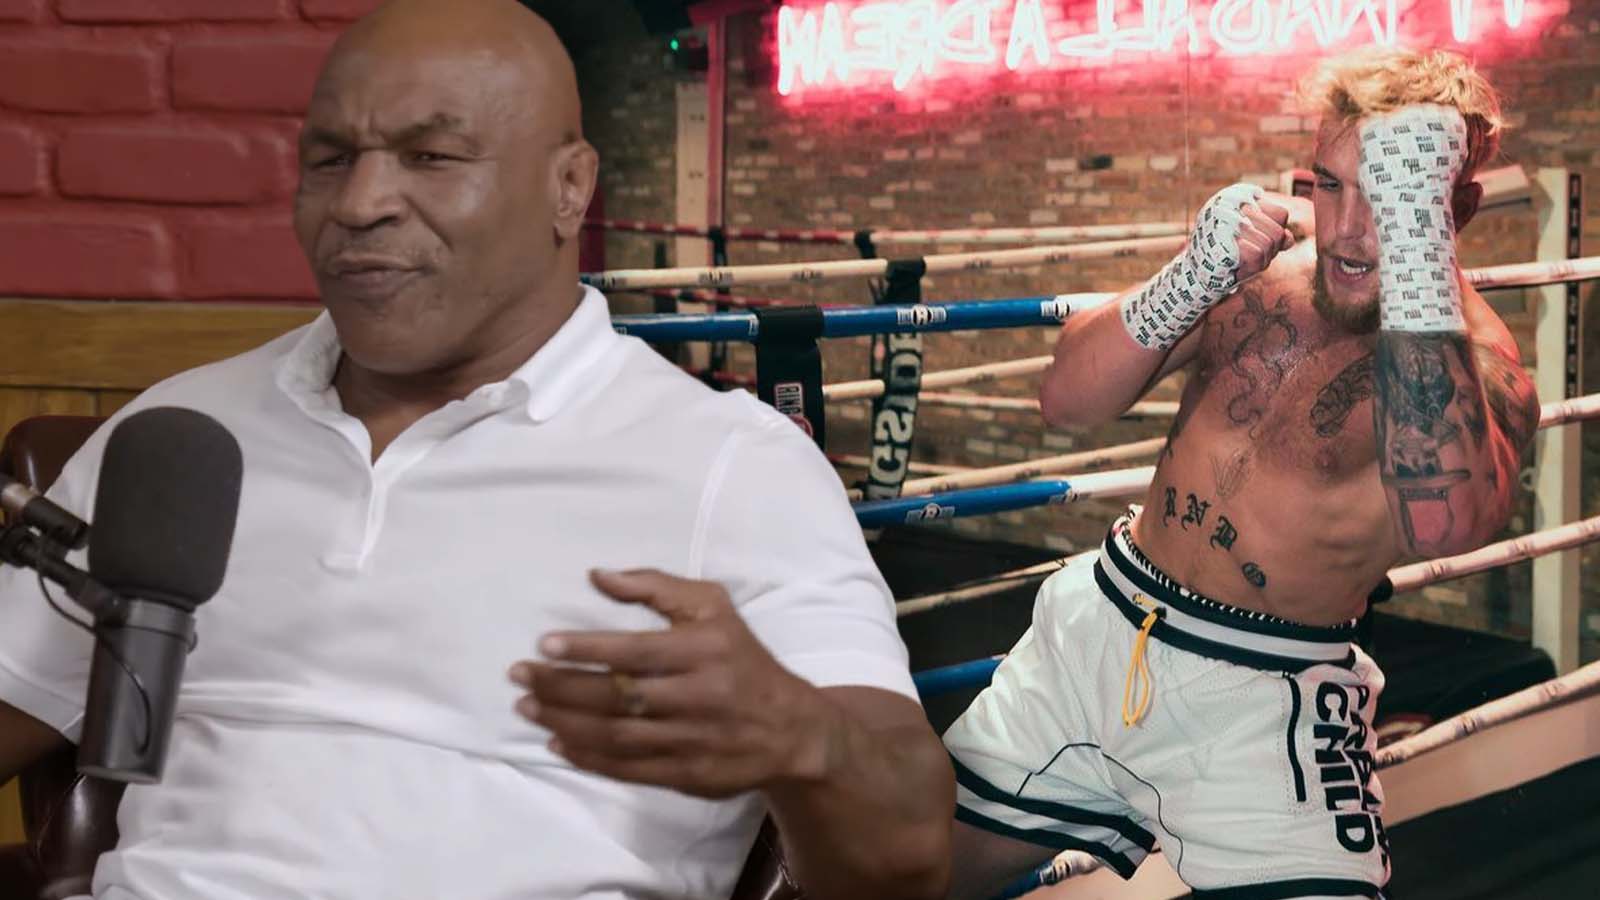 Mike Tyson claims YouTube boxers like Jake Paul are the future of the sport